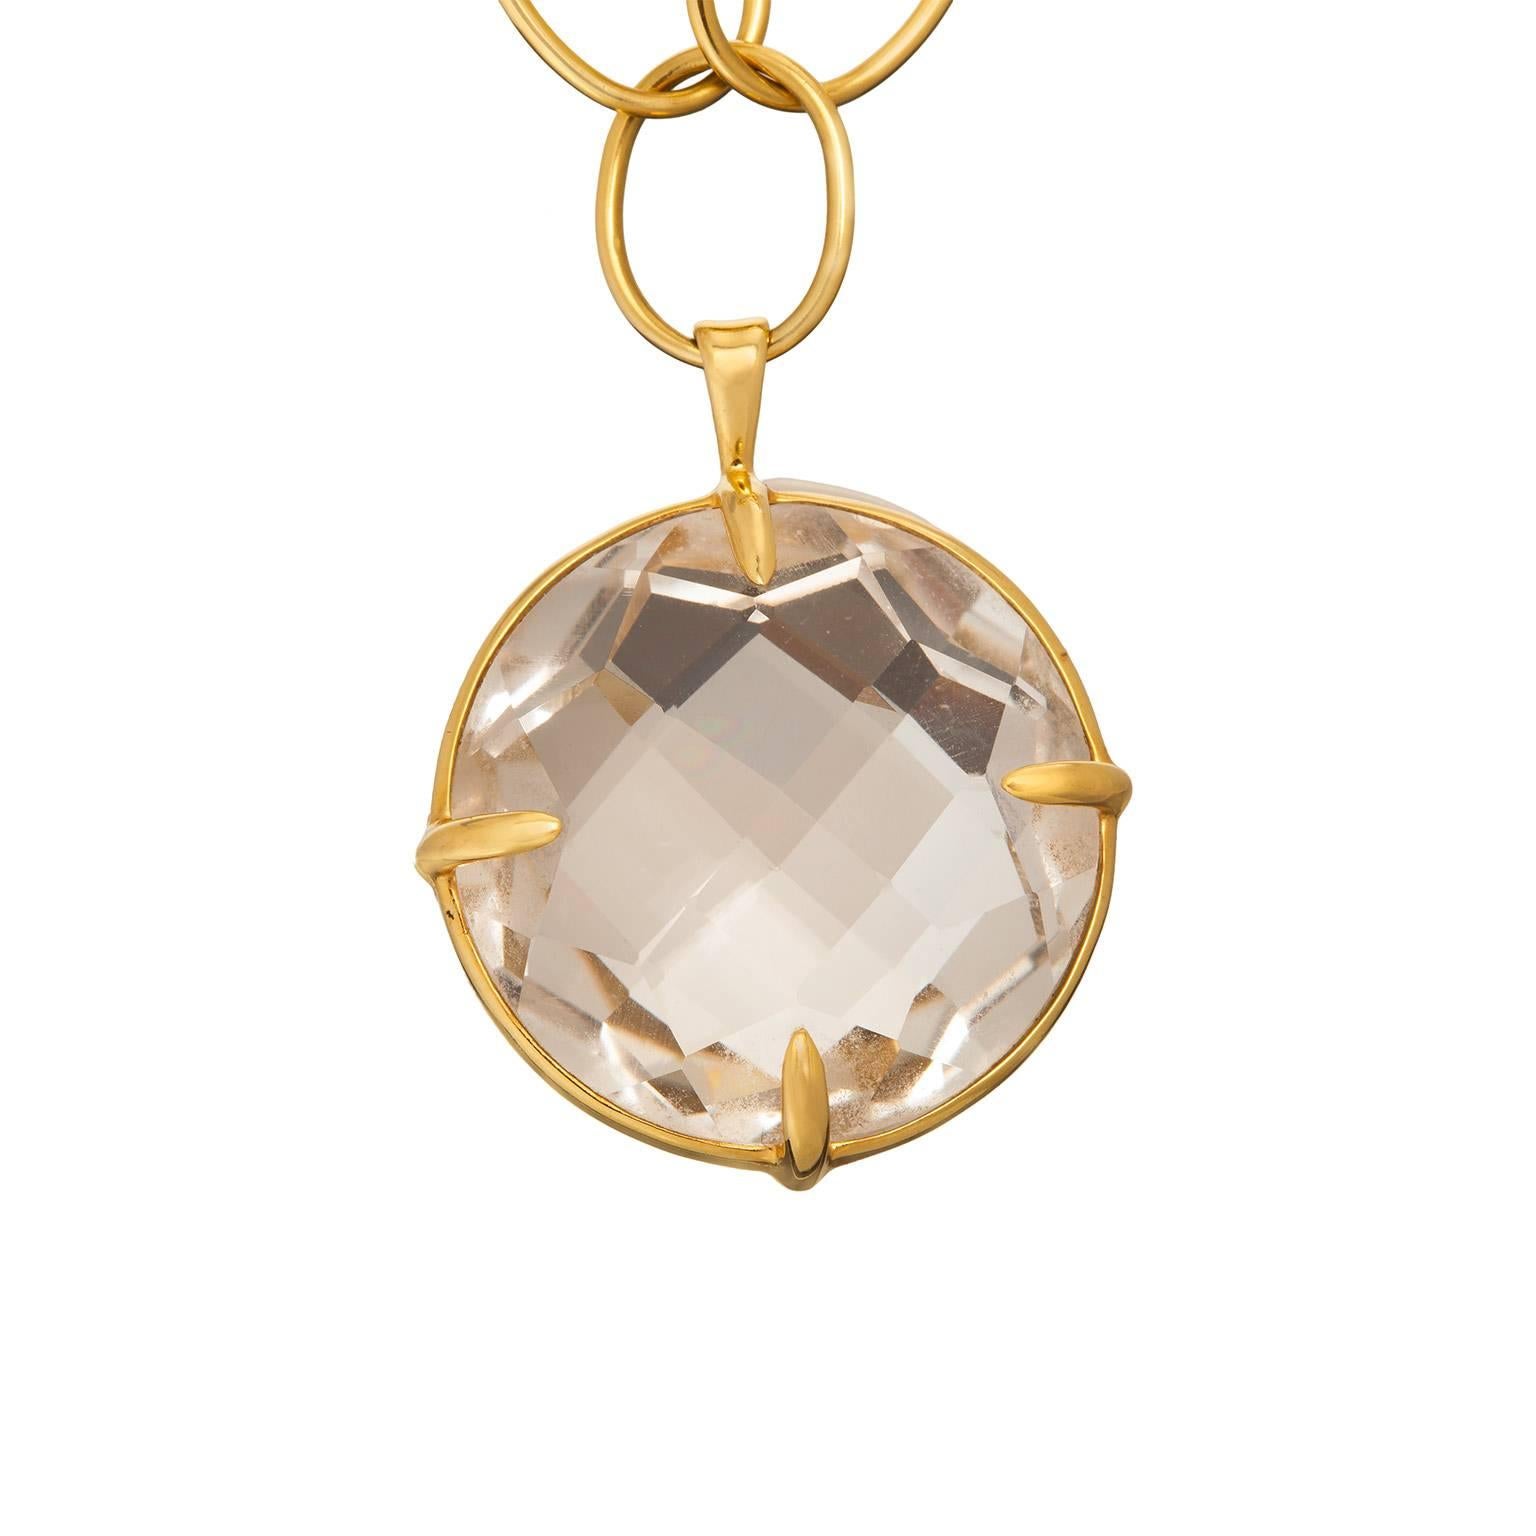 A very easy to wear Ippolita rock crystal quartz pendant necklace with an open link 18k yellow gold chain.  The quartz is round in shape, and faceted on both sides, partially bezel and prong set.  The chain is 20.00 inches.

Quartz Measurement: 